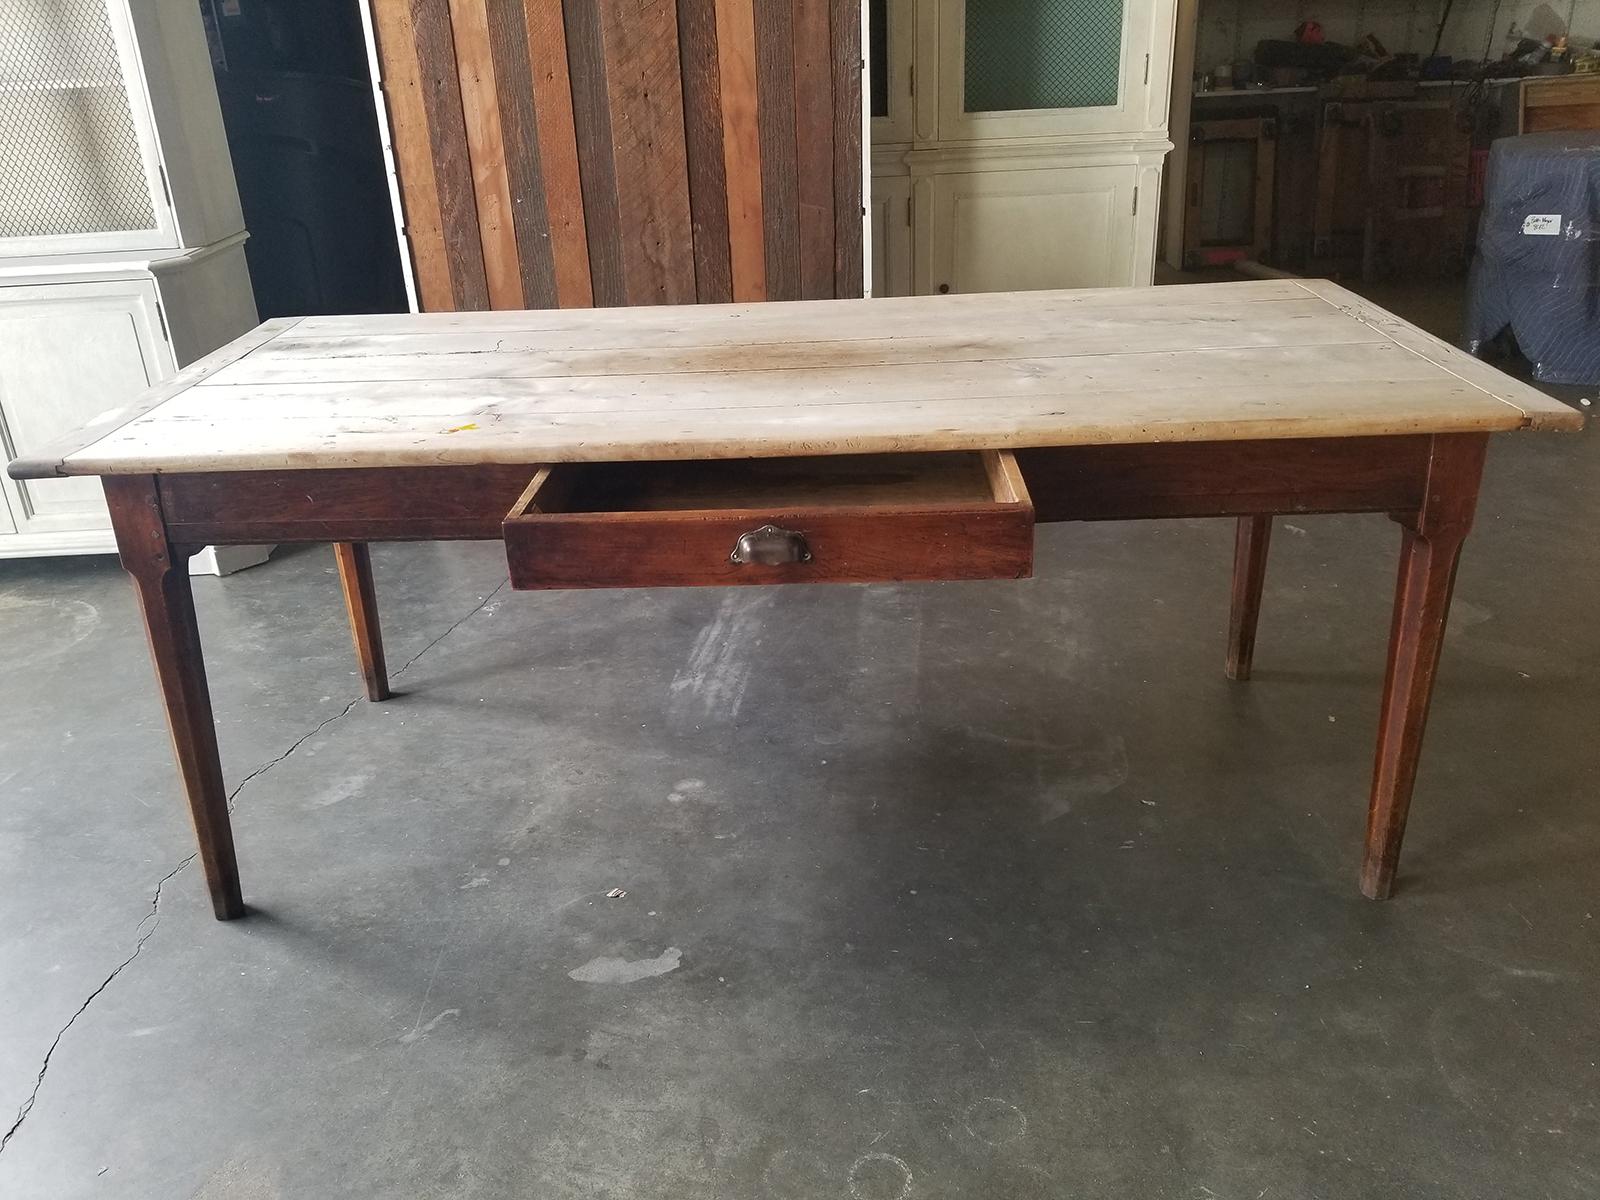 19th Century Pegged Farm Table with Natural Plank Top, Two Utensil Drawers 12